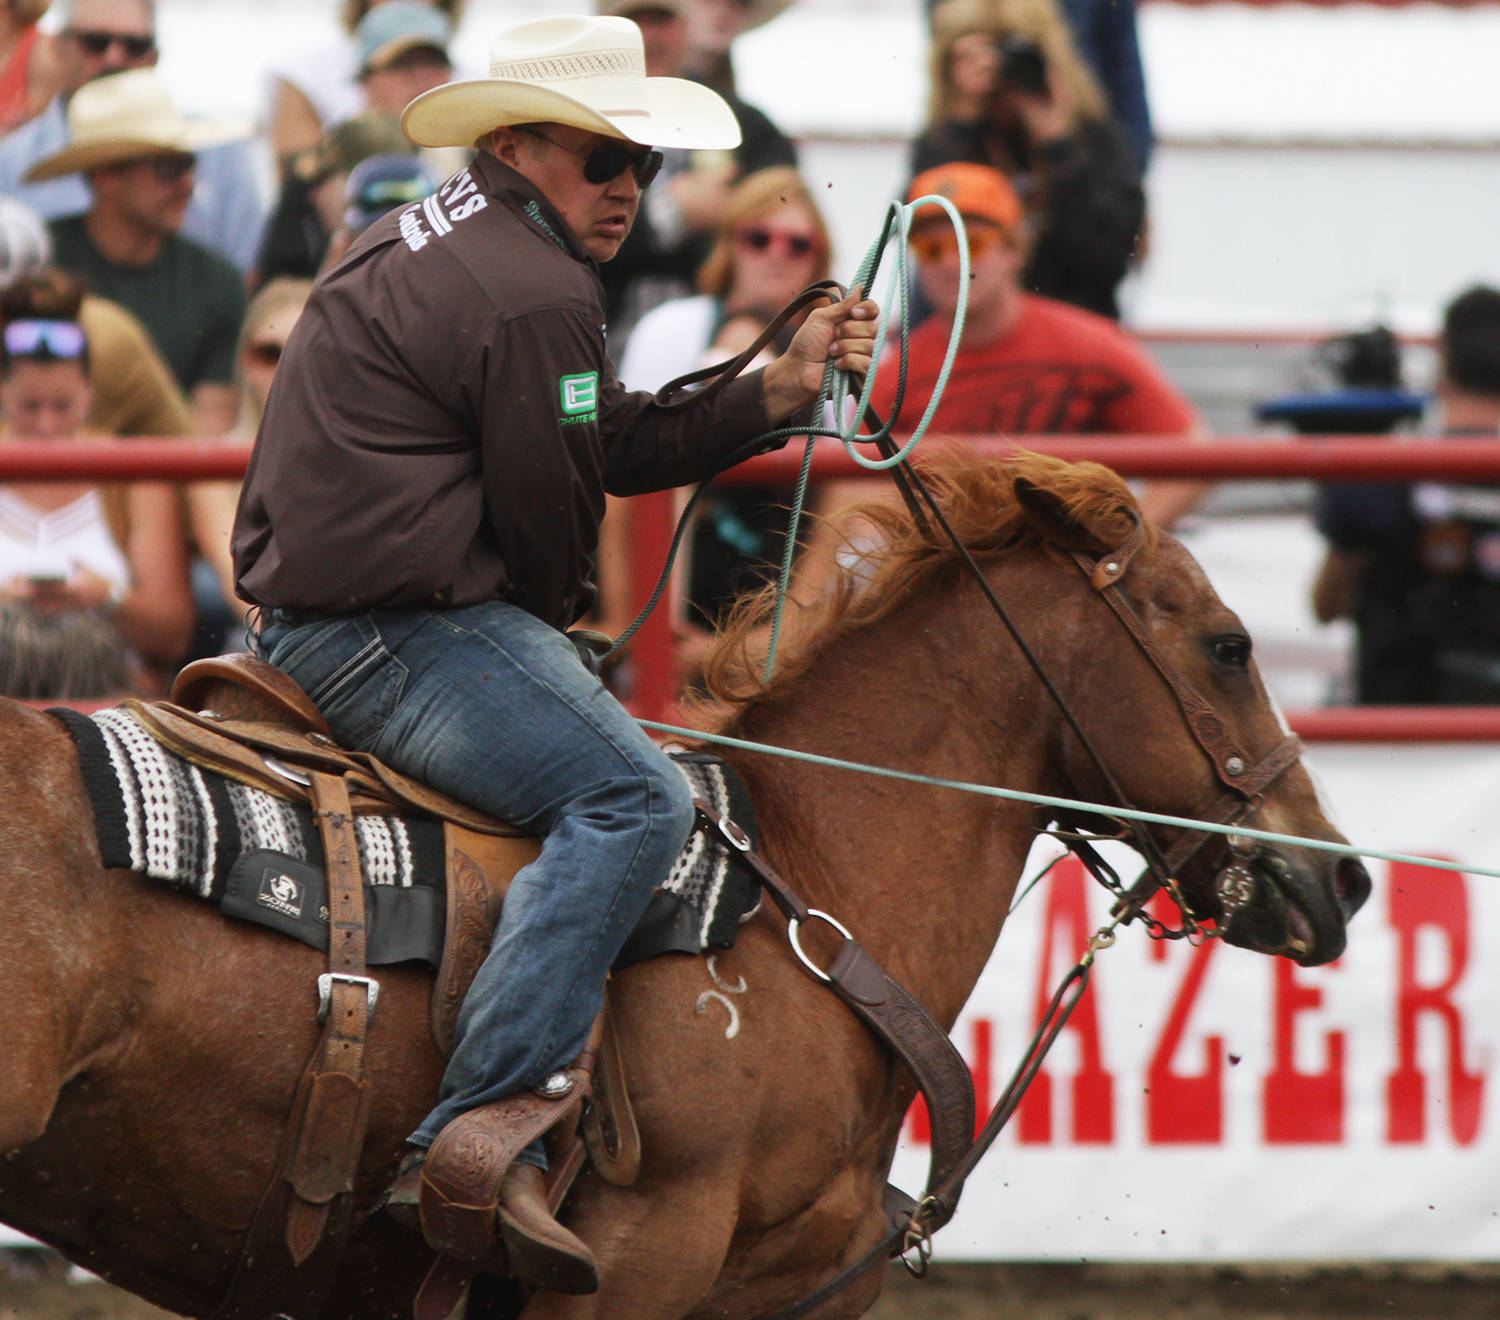 The champion team roper team of Levi Simpson and Jeremy Buhler faced some serious competition on Saturday’s performance but the pair managed to land in the sixth spot with a combined total of 14.3 seconds. Here Simpson pulls a calf towards his horse.